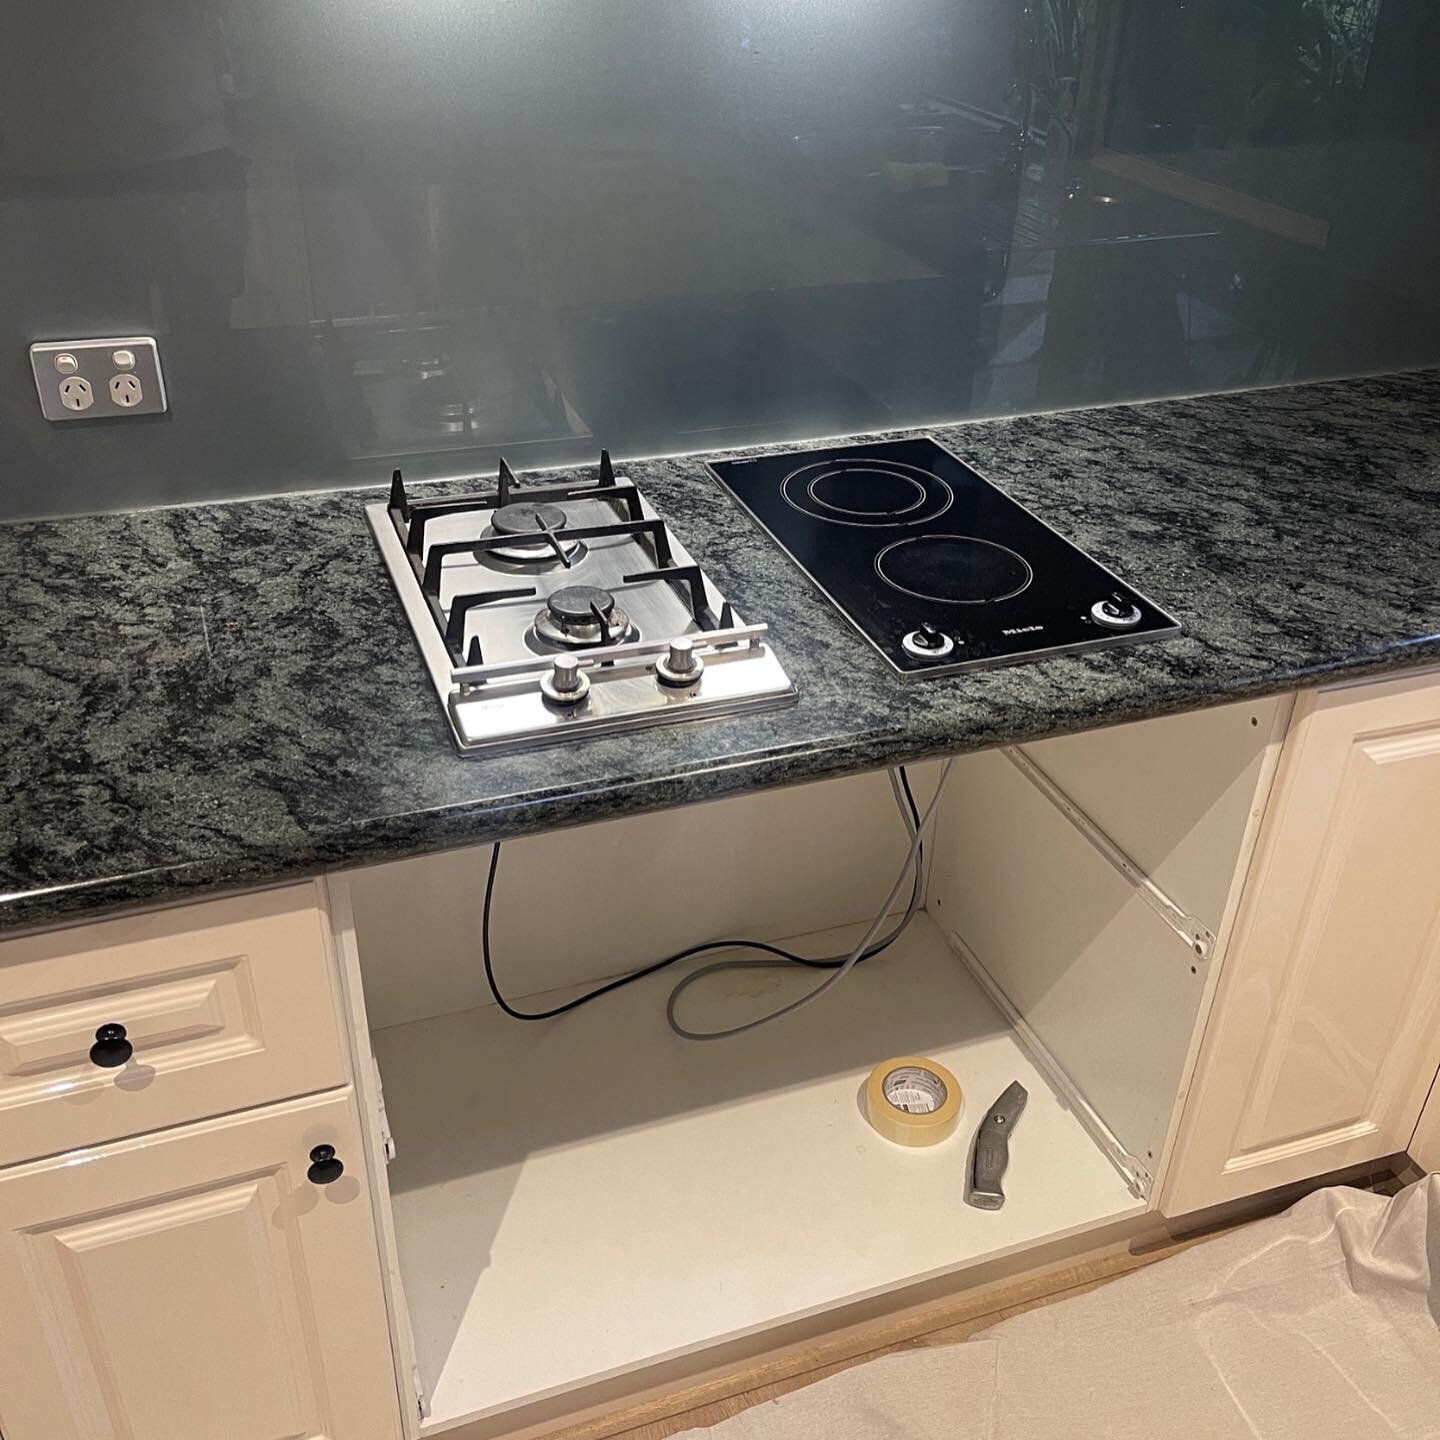 Cooktop installation from today.

Dustless stone bench top cutting for a clean work space and clean lungs, 

#plumbarrplumbing #melbourneplumber #cooktop